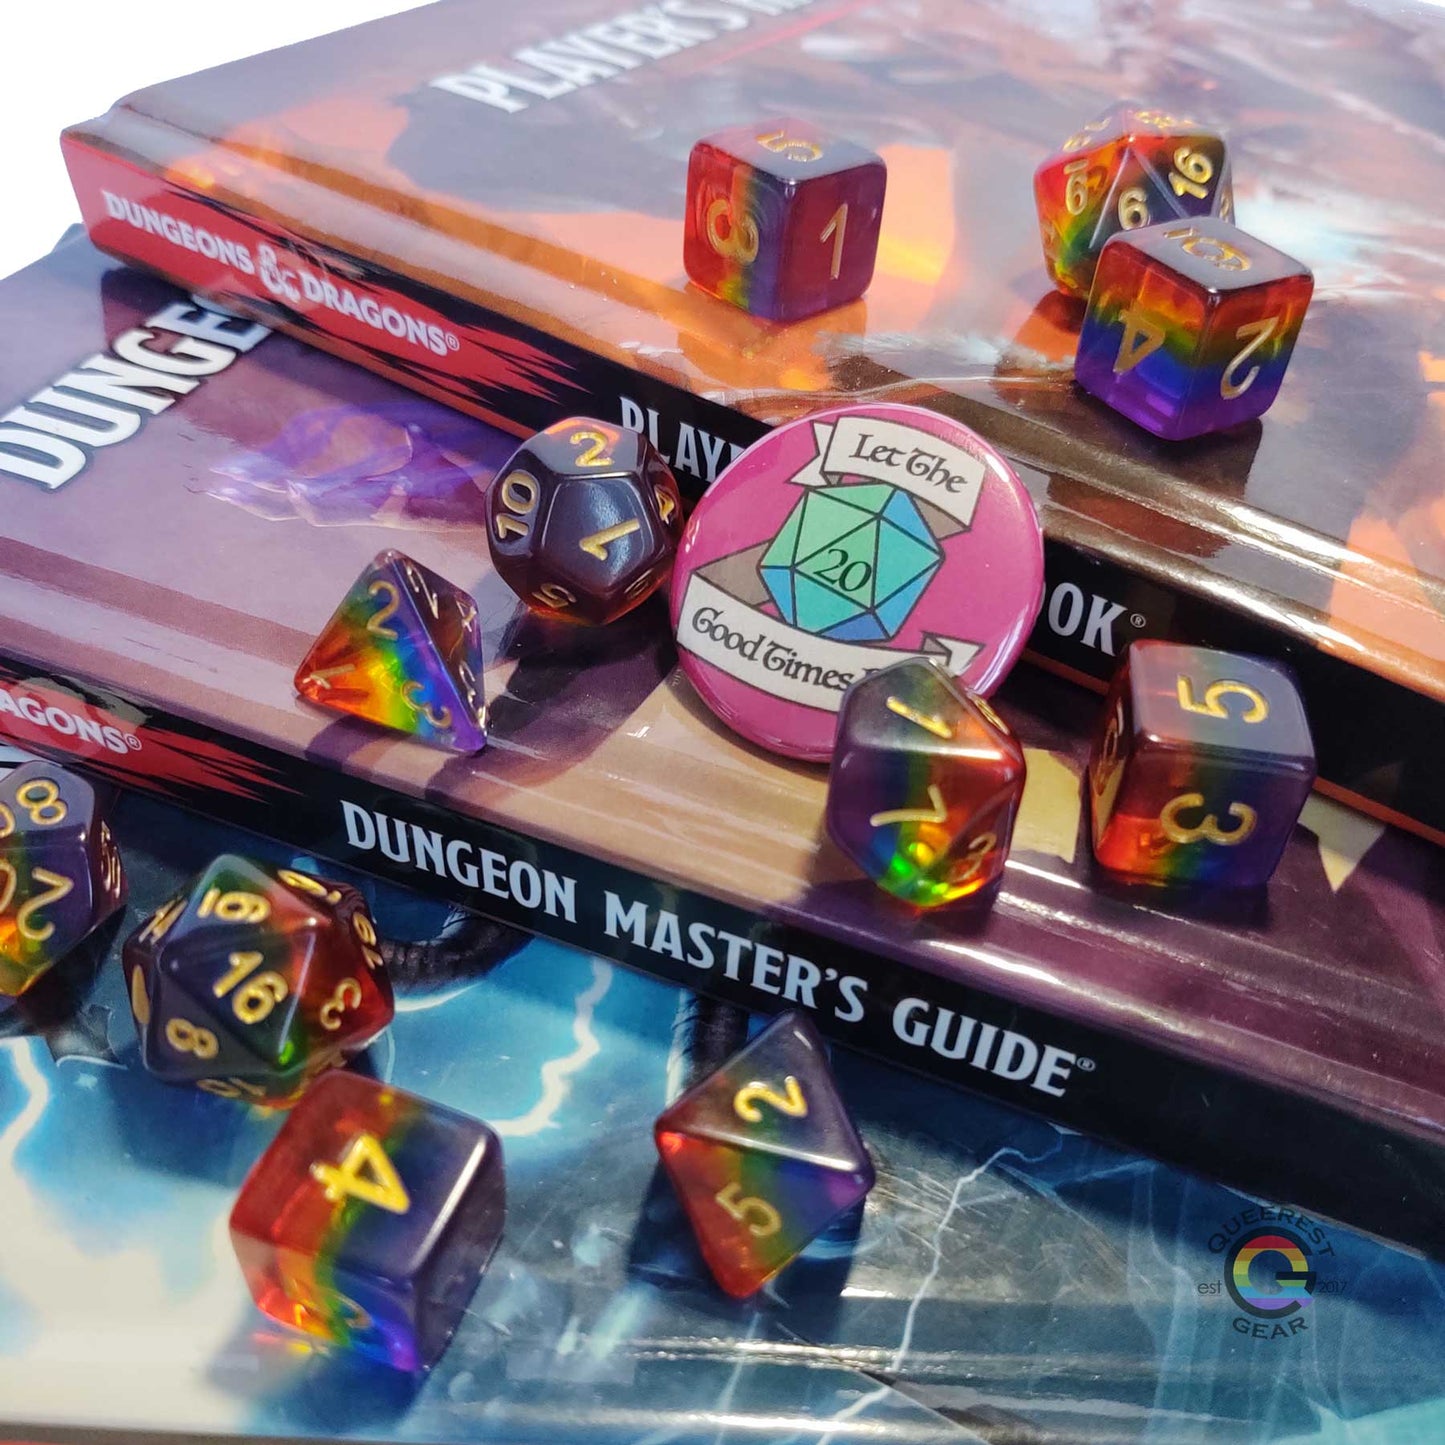 11 piece set of polyhedral dice scattered on a stack of D&D books. They are transparent and colored in the stripes of the rainbow flag with gold ink. There is the freebie “let the good times roll” pinback button among them. 